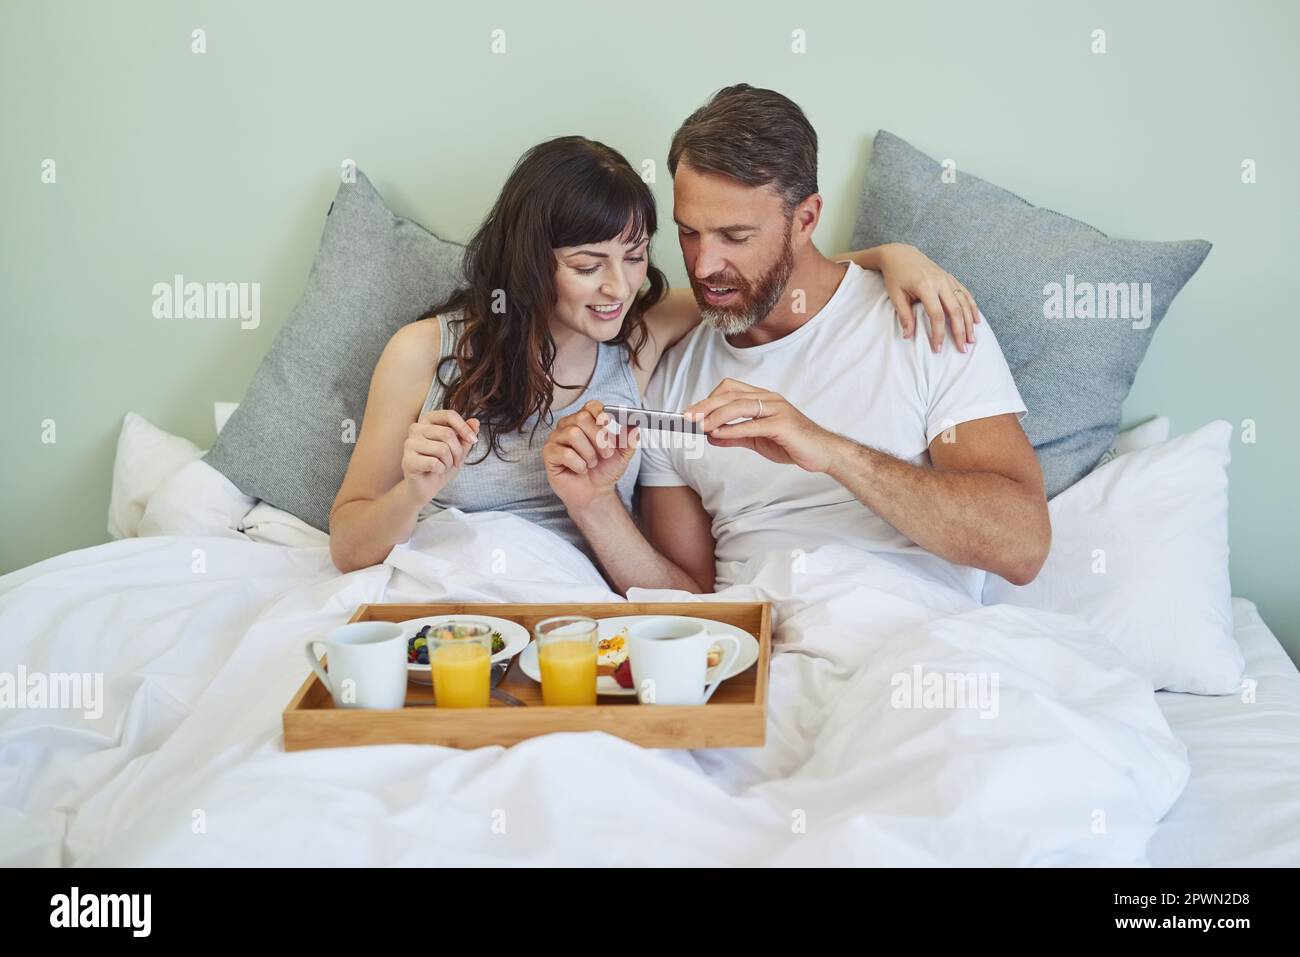 Lets make people jealous with a photo of our food. a cheerful young couple sitting in bed while enjoying breakfast together and taking a picture durin Stock Photo